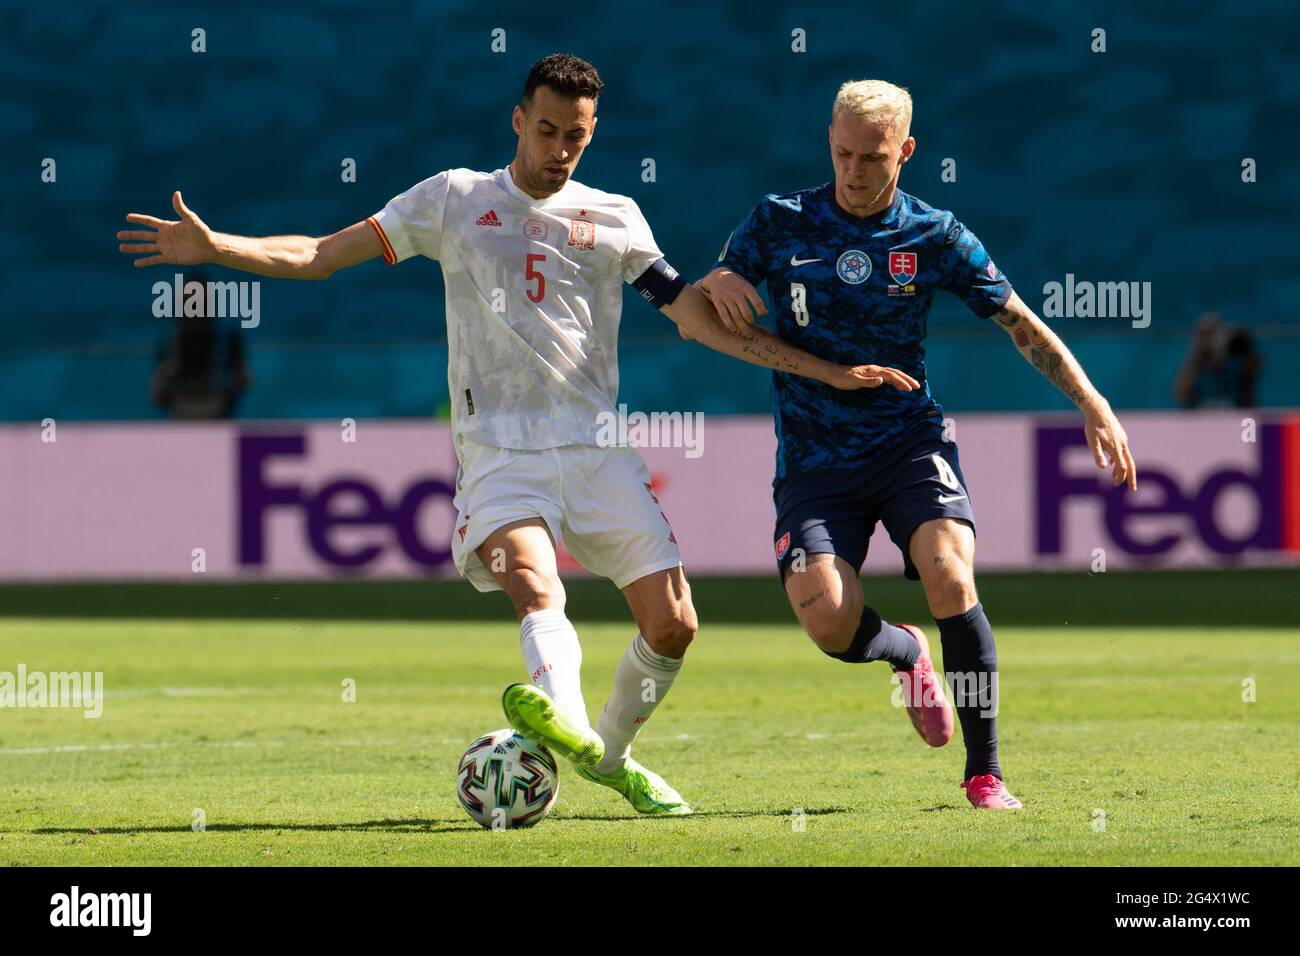 Seville, Spain. 23rd June, 2021. Spain's Sergio Busquets (L) vies with Slovakia's Ondrej Duda during the Group E match between Slovakia and Spain at the UEFA Euro 2020 in Seville, Spain, June 23, 2021. Credit: Meng Dingbo/Xinhua/Alamy Live News Stock Photo